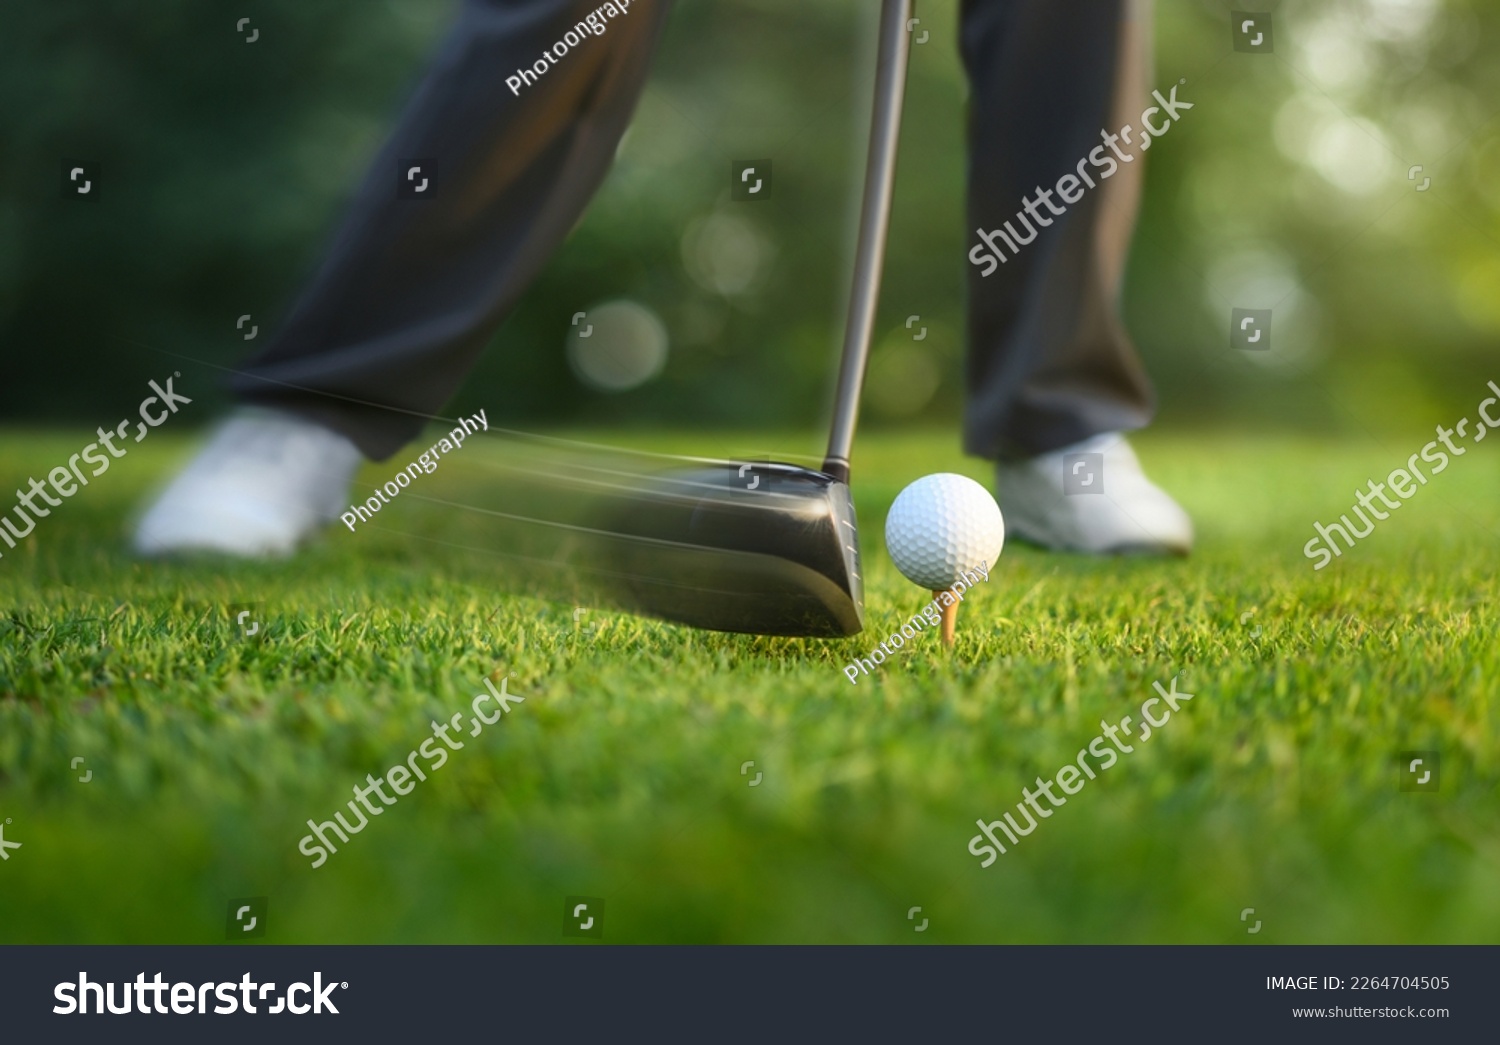 Motion action of teeing off golf ball with drivers. #2264704505